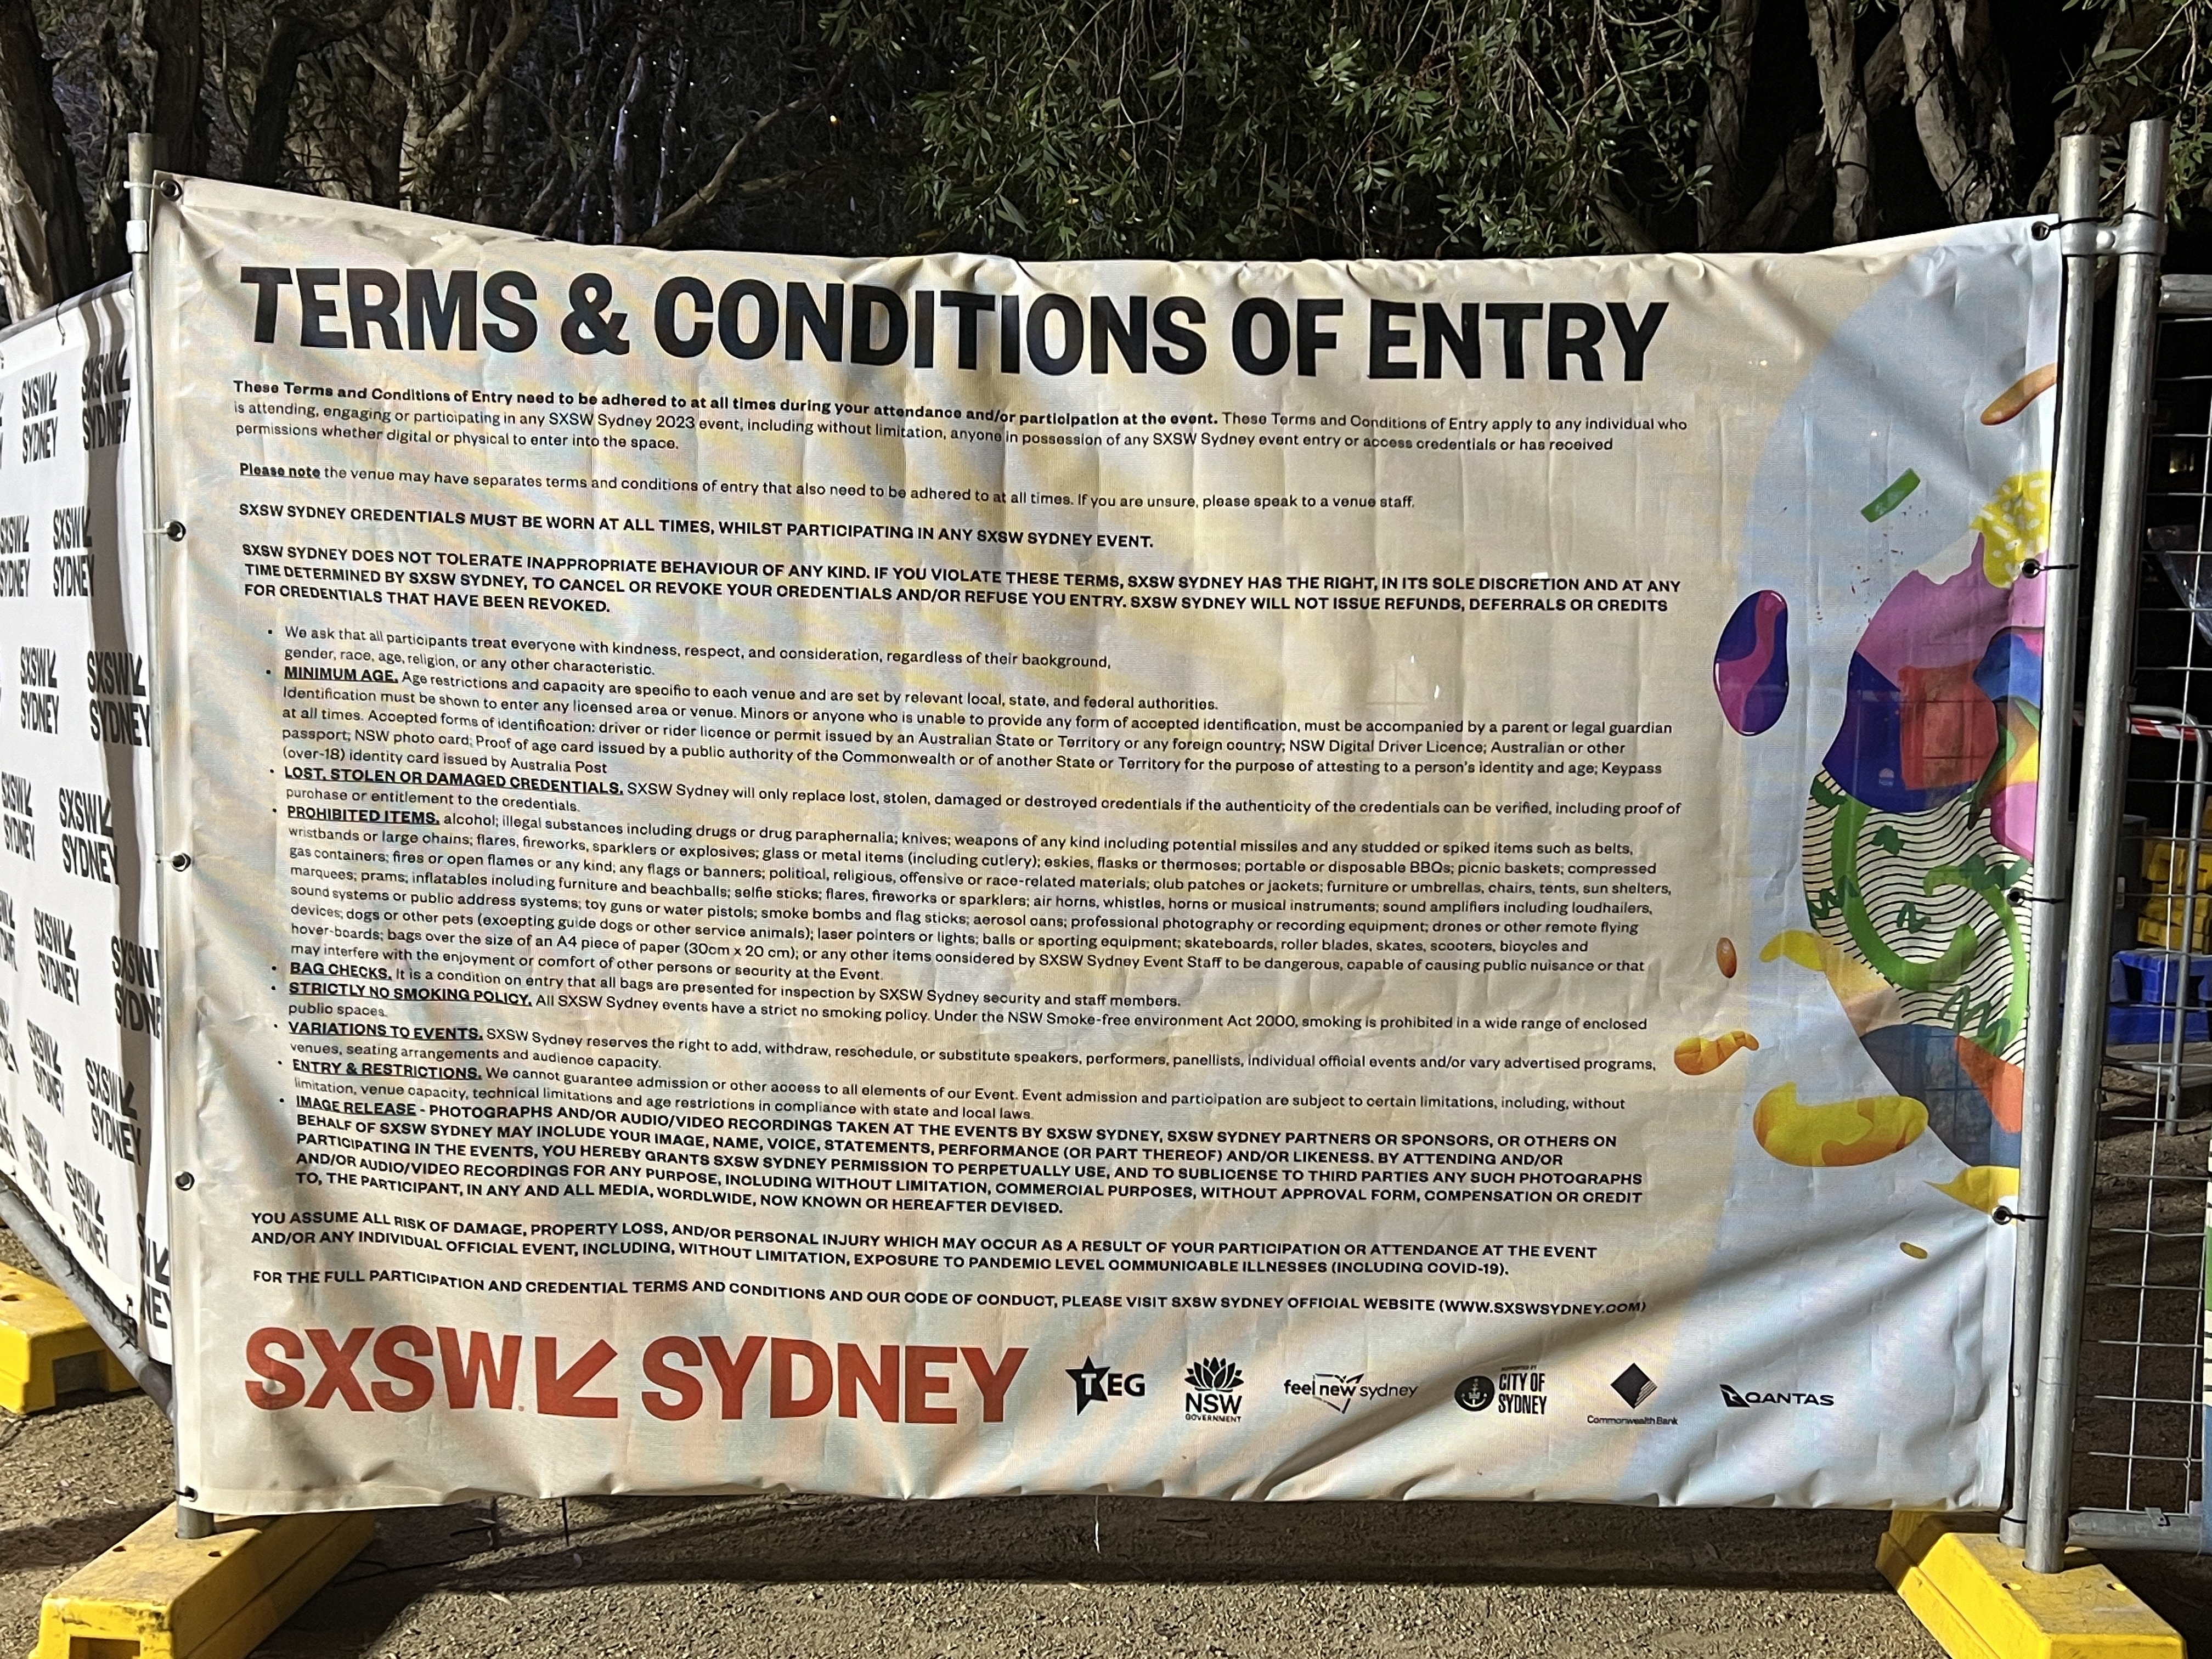 Poster showing terms and conditions